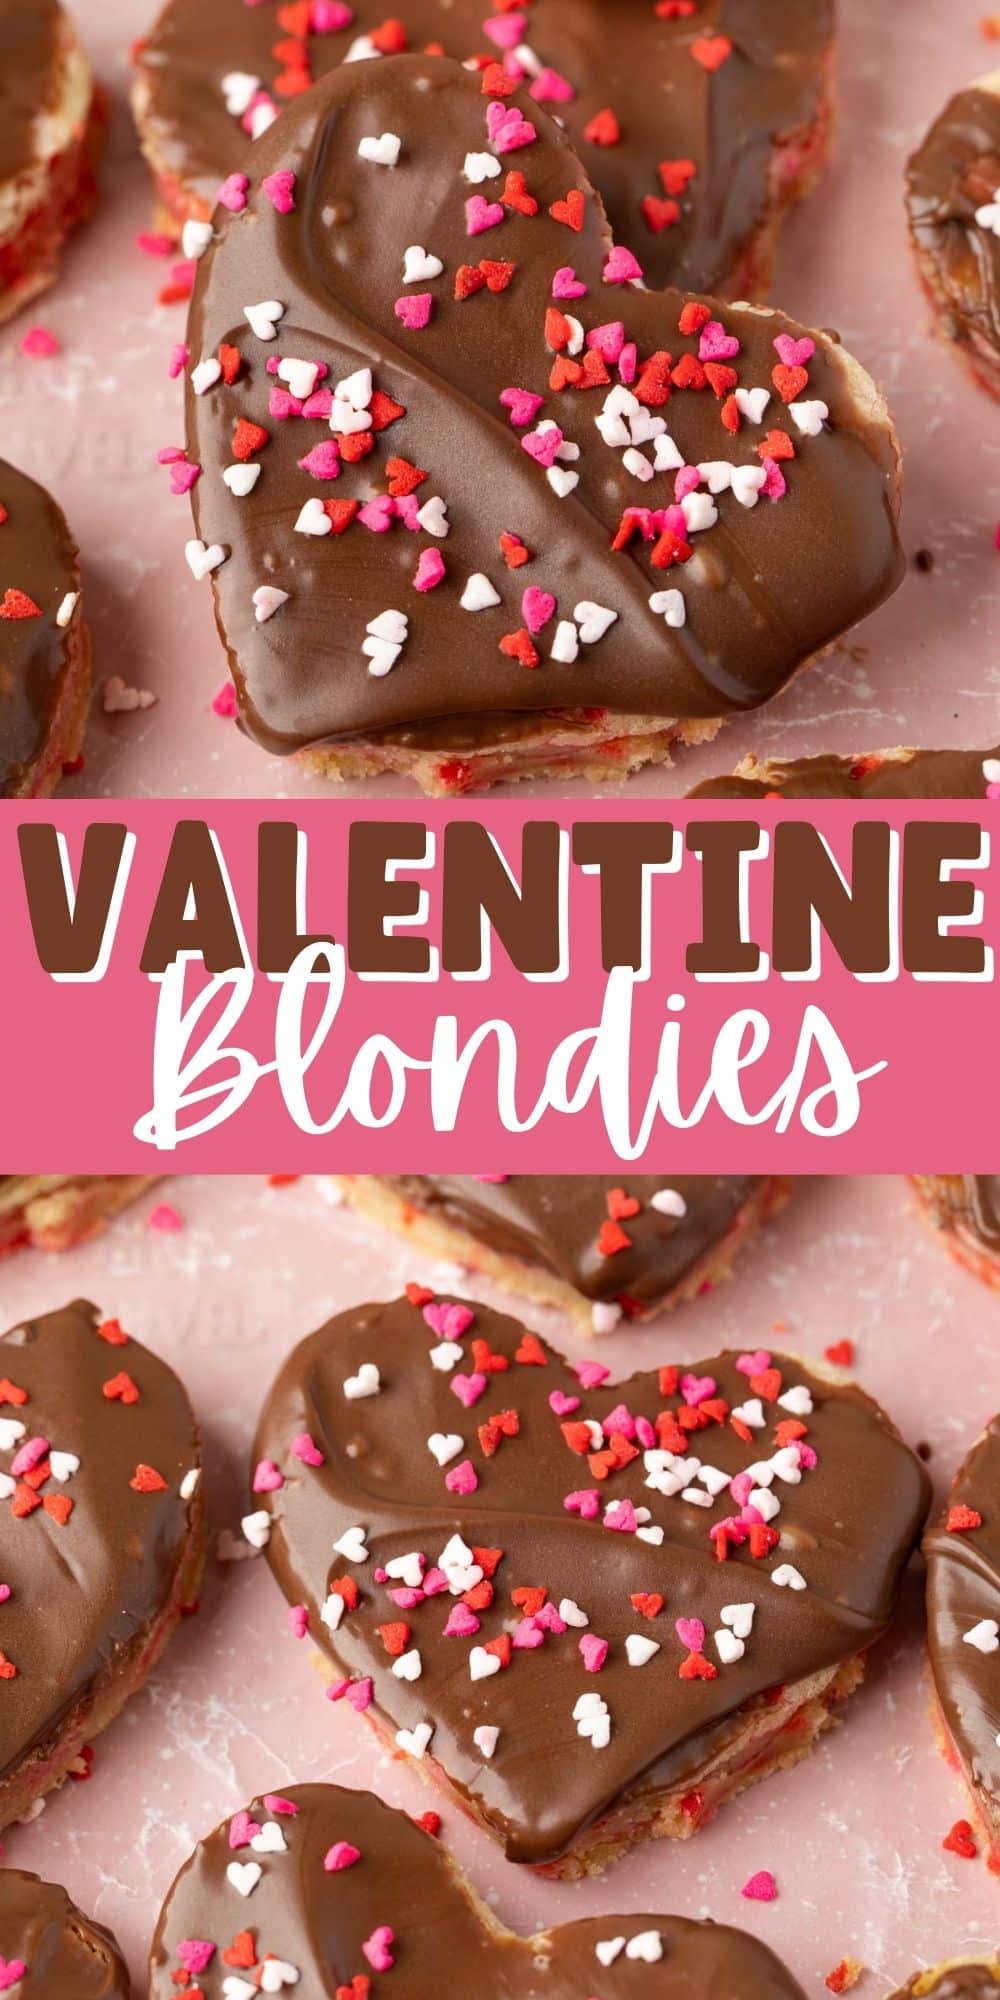 two photos of heart shaped sugar cookies with chocolate frosting and red sprinkles on top and words on the image